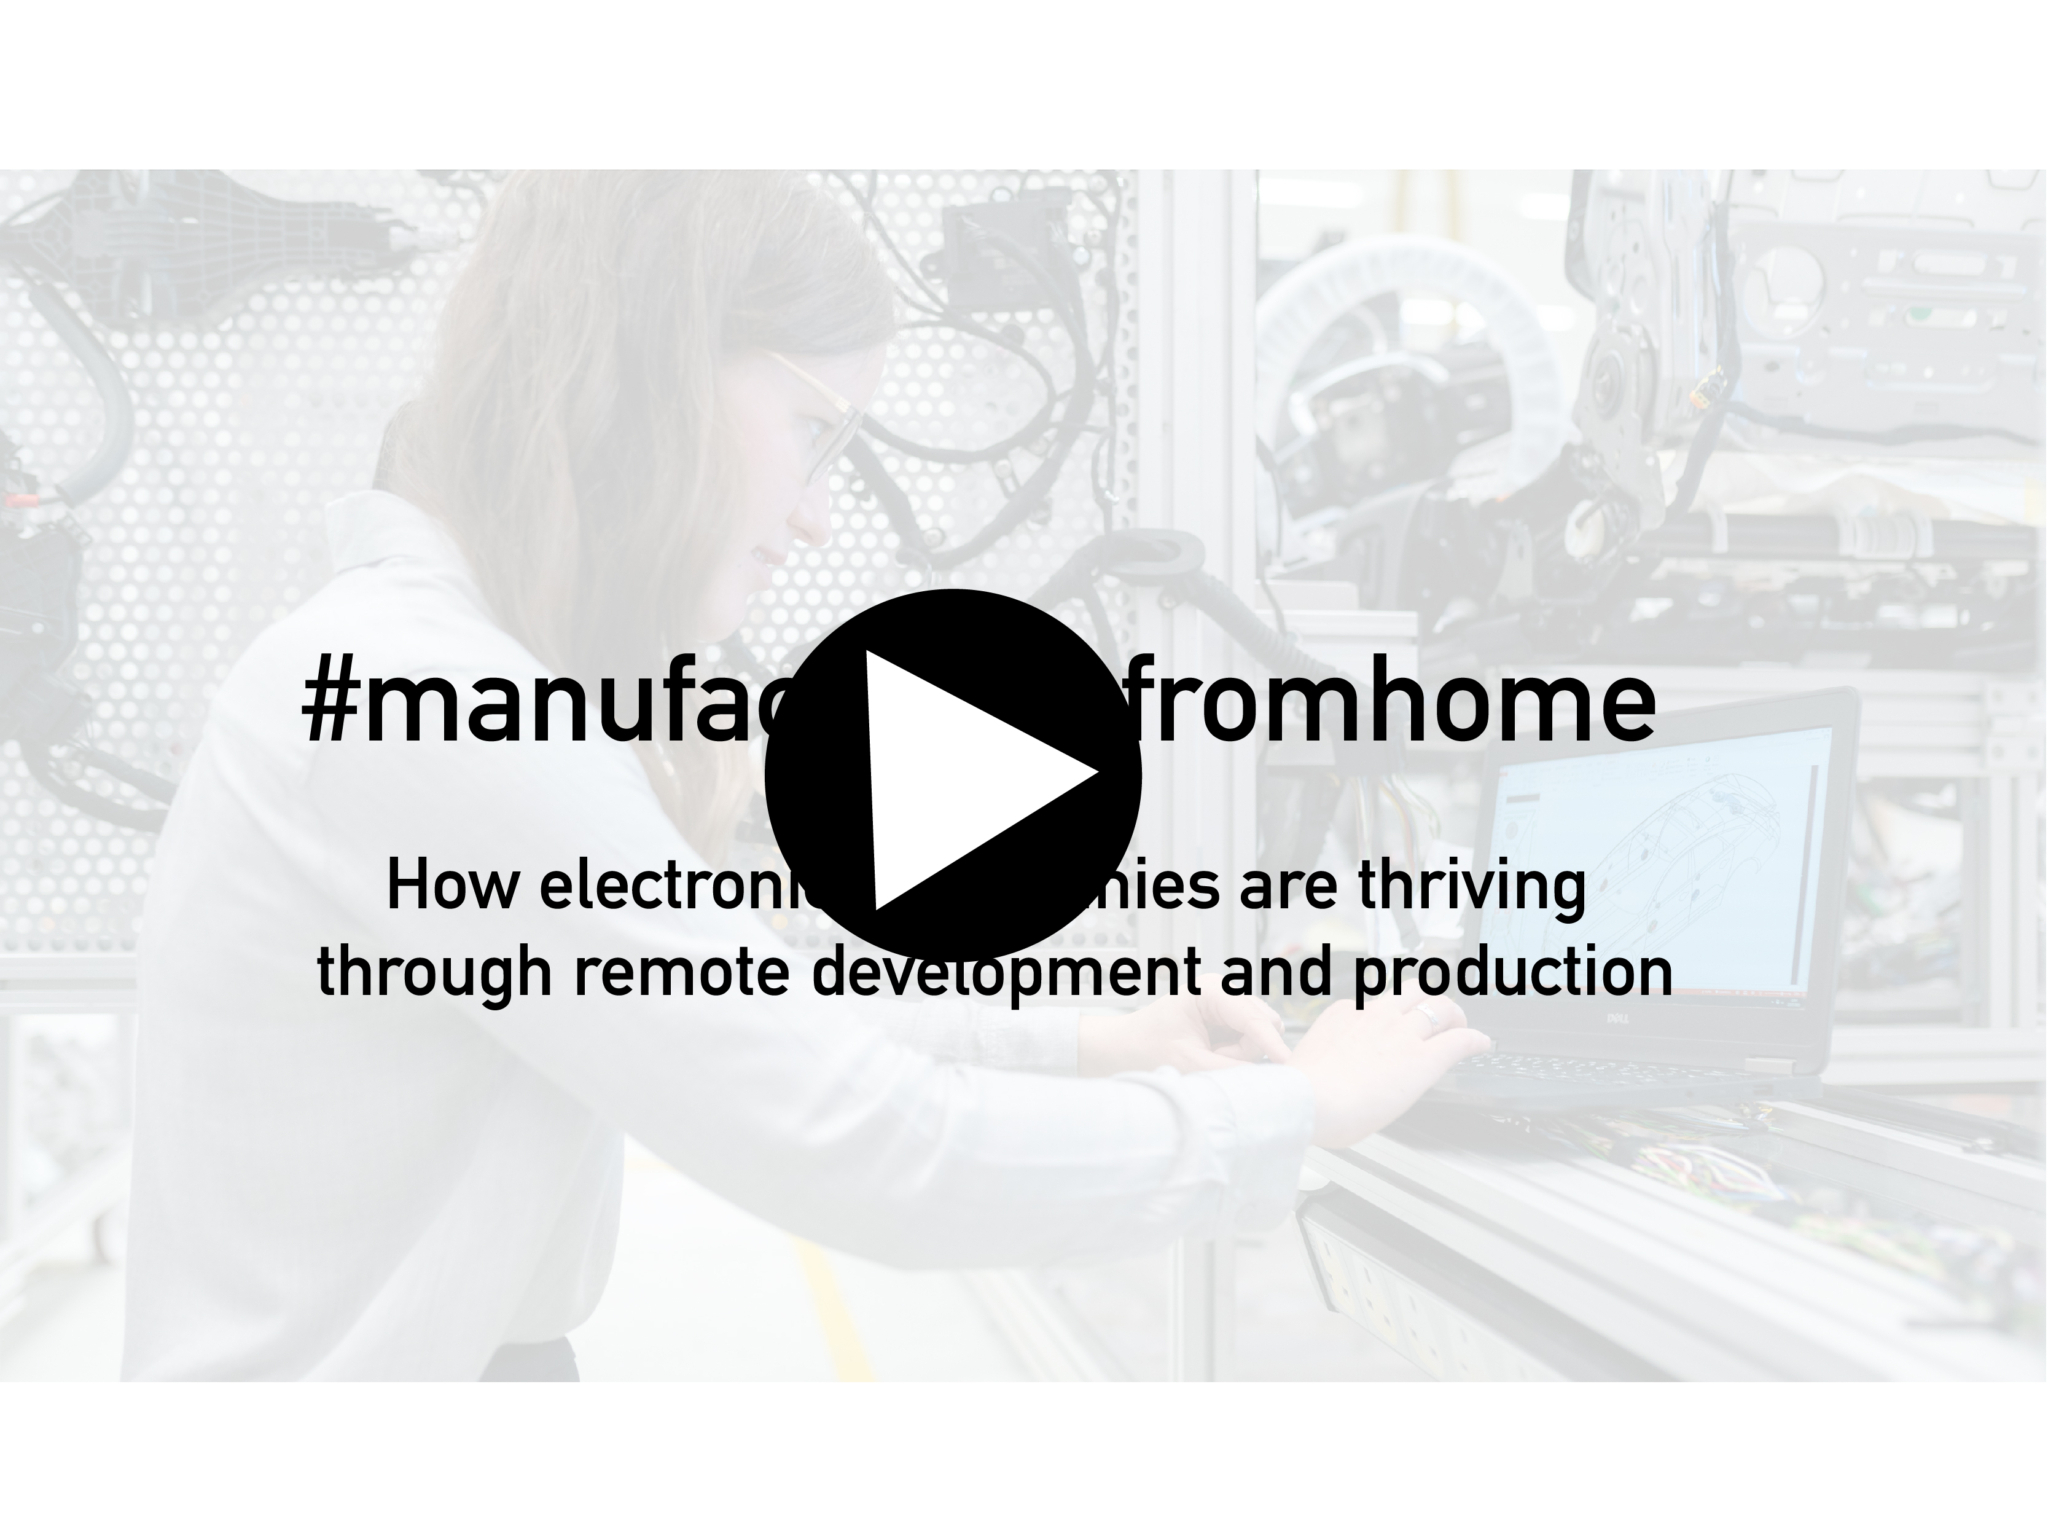 Watch the full Manufacturing From Home video featured image